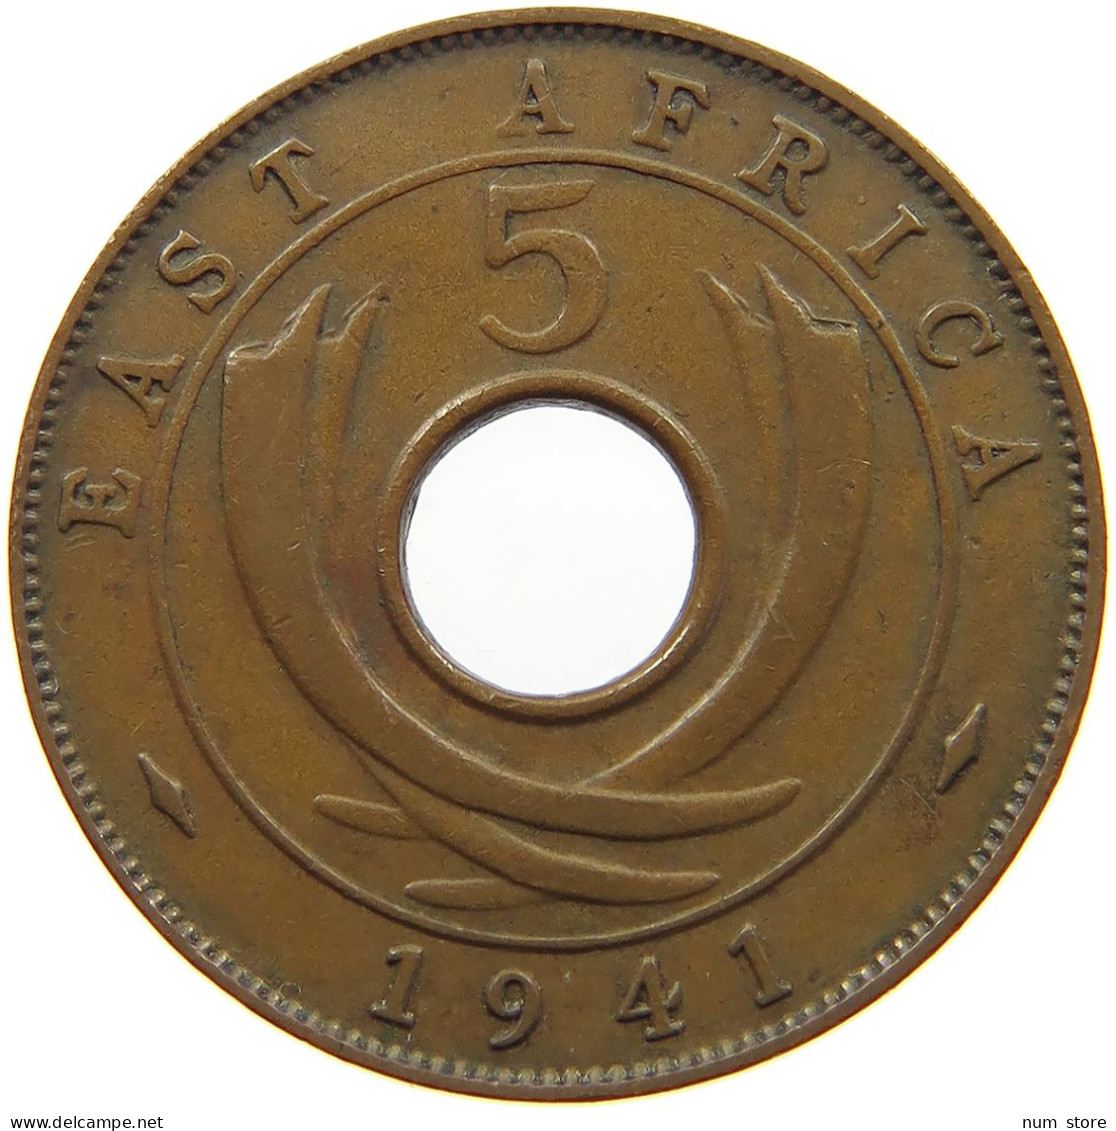 EAST AFRICA 5 CENTS 1941 George VI. (1936-1952) #a095 0147 - East Africa & Uganda Protectorates